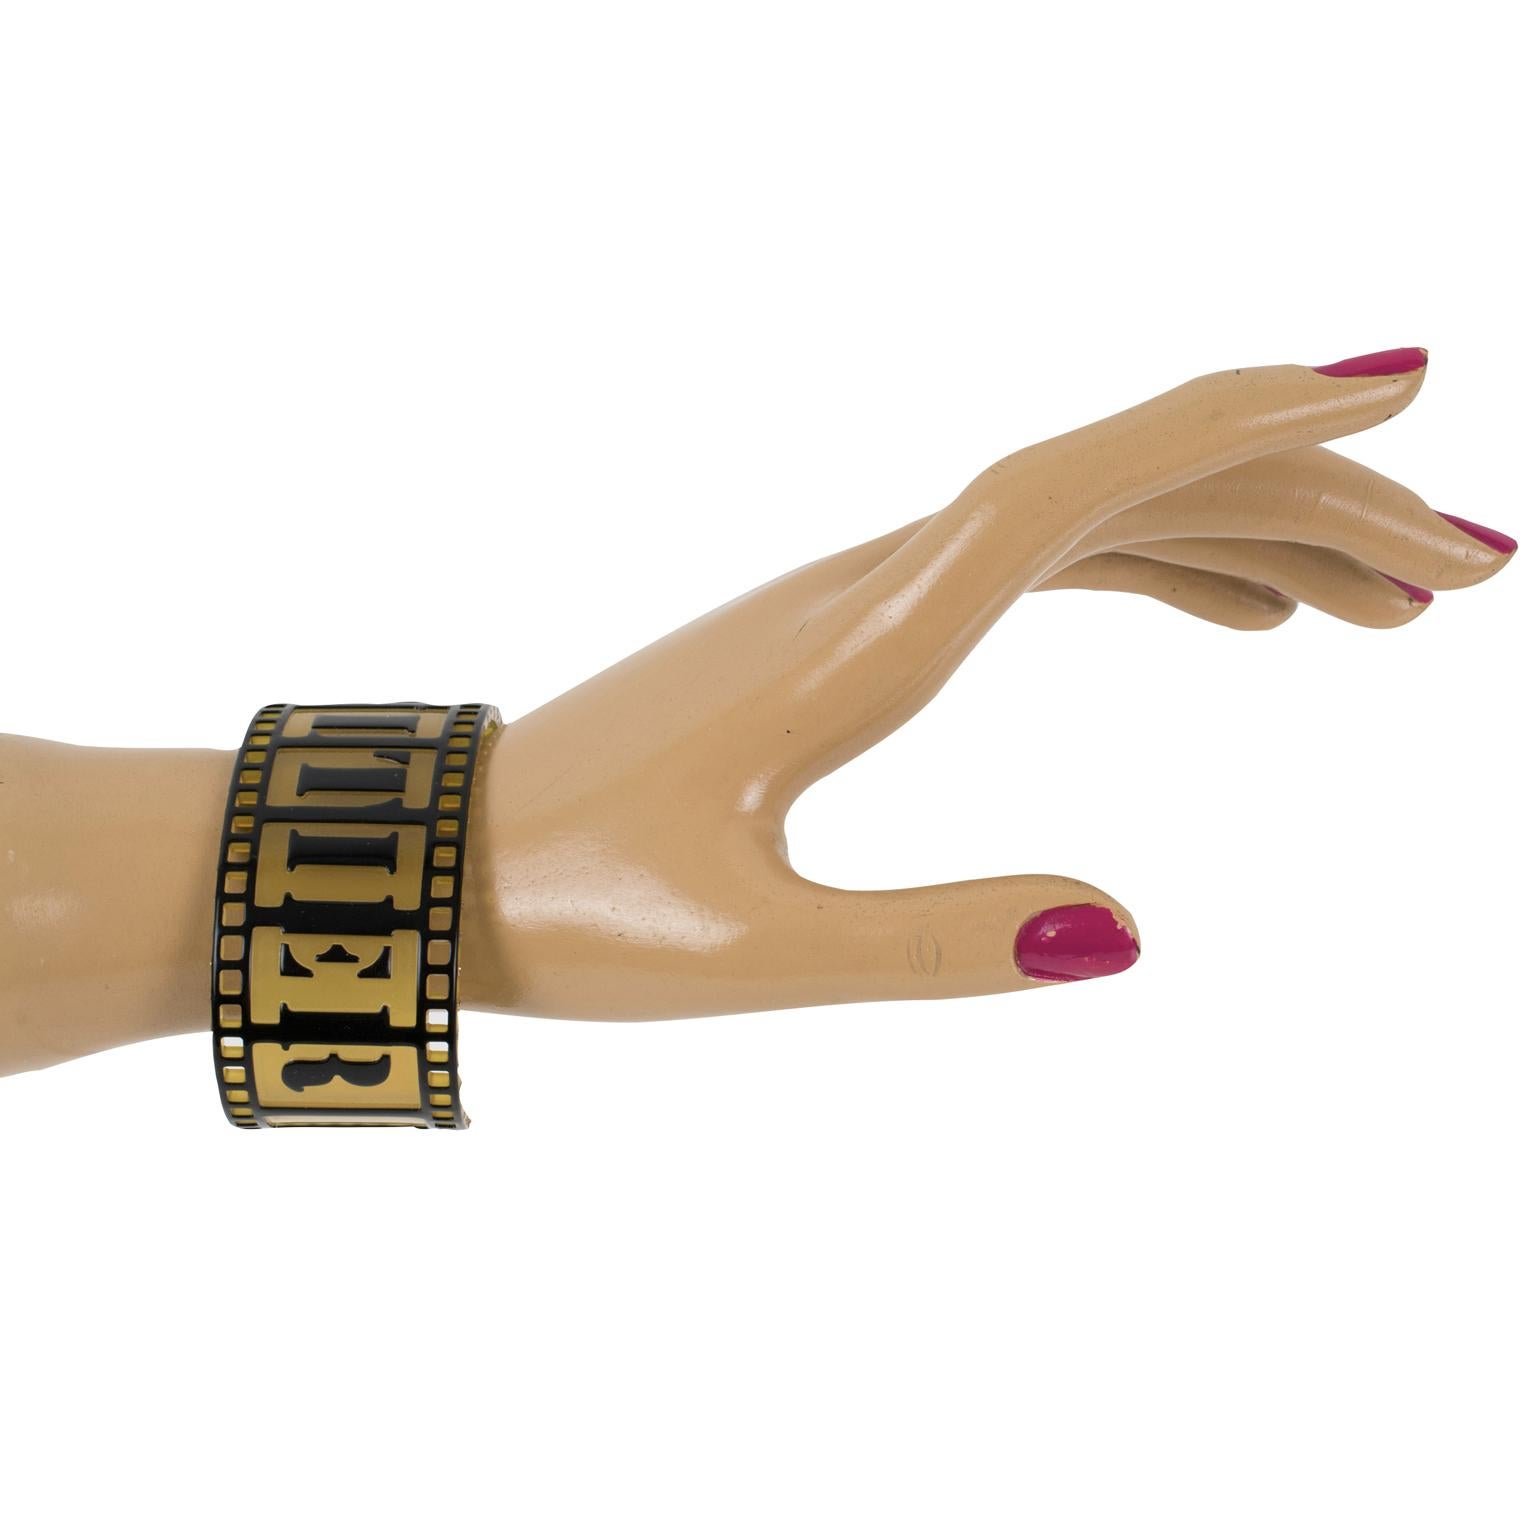 Jean Paul Gaultier Runway Black and Yellow Resin Cuff Bracelet Old Film Strip For Sale 6